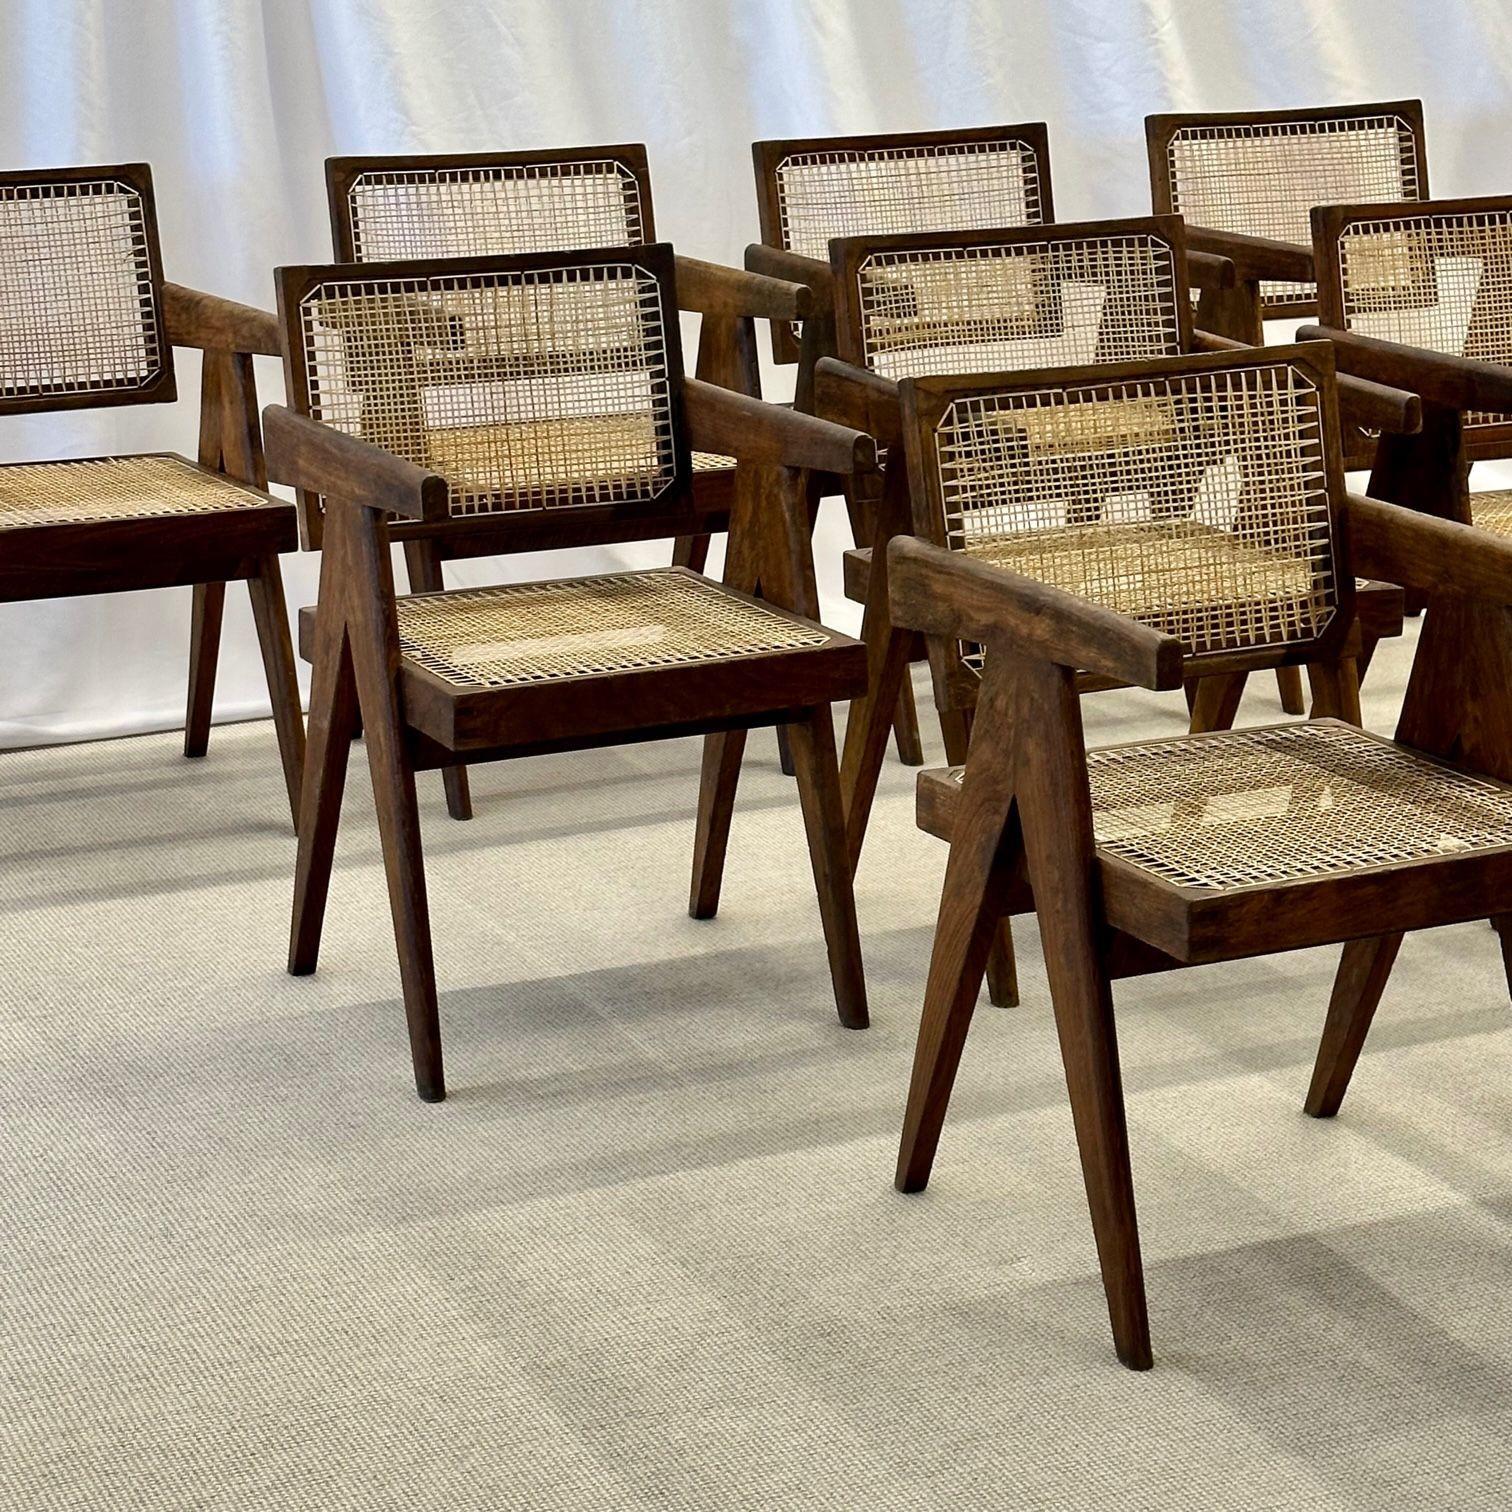 Mid-20th Century  French Mid-Century, Ten Floating Back Dining Chairs, Teak, Cane